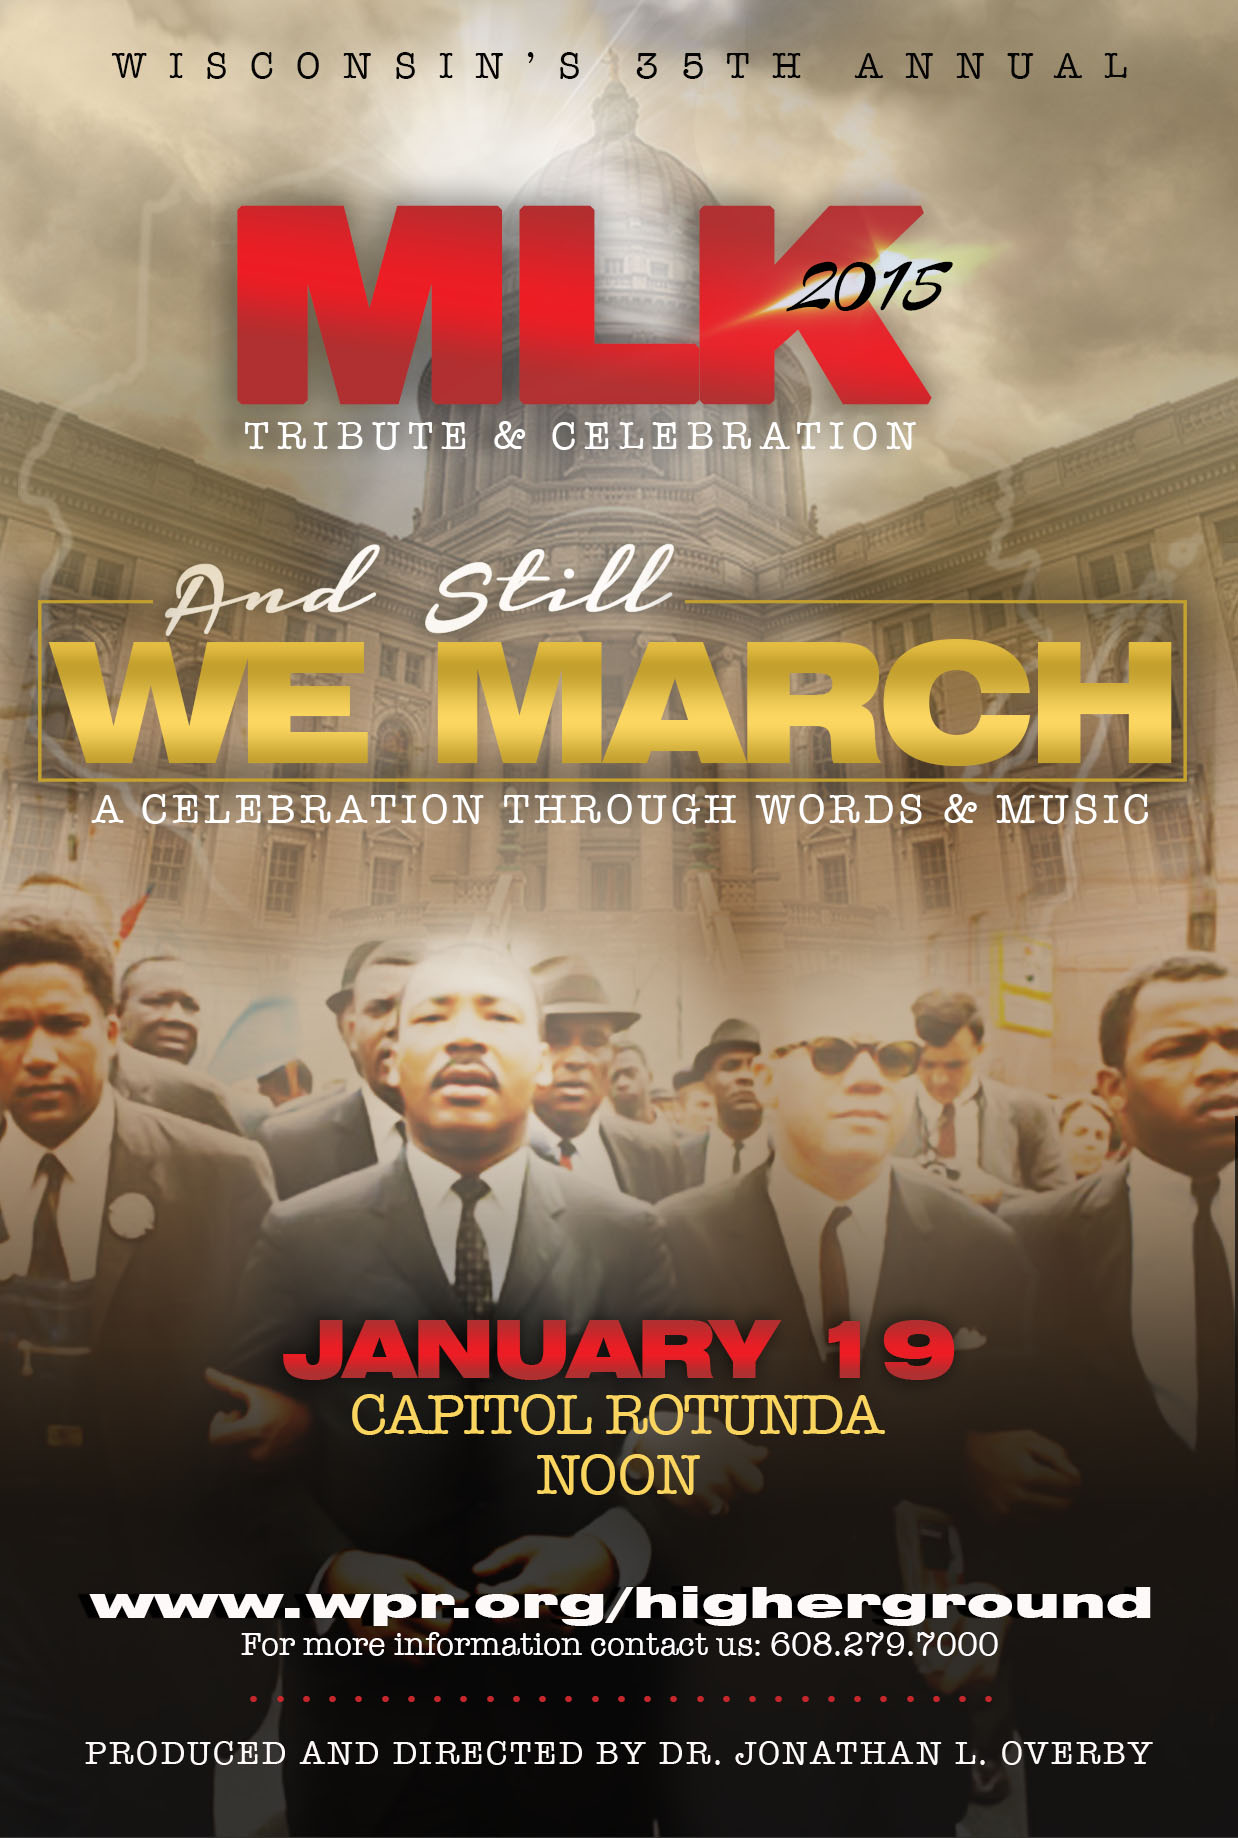 Wisconsin Celebrates The Life and Legacy Of MLK, 2015 Event Planning Underway